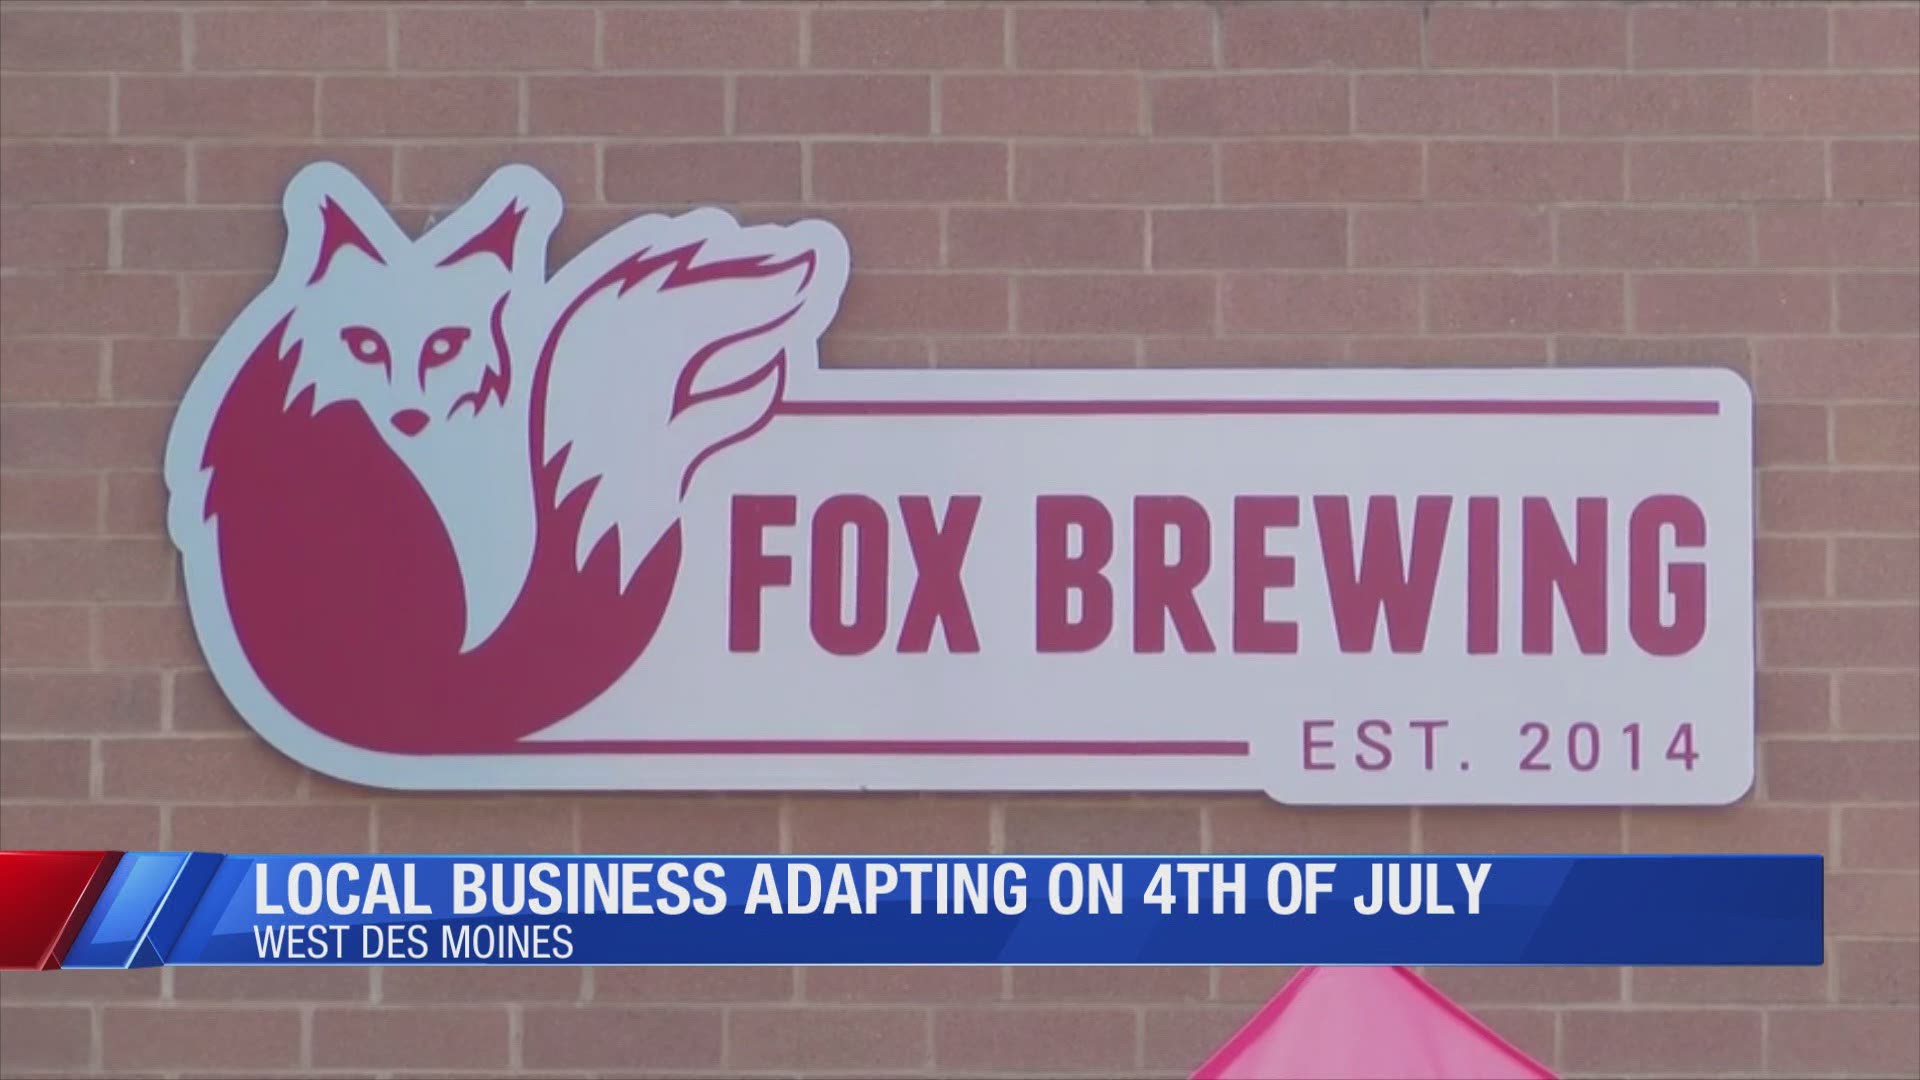 Local 5 caught up with two establishments on the 4th of July on how they're keeping things festive amid the pandemic.